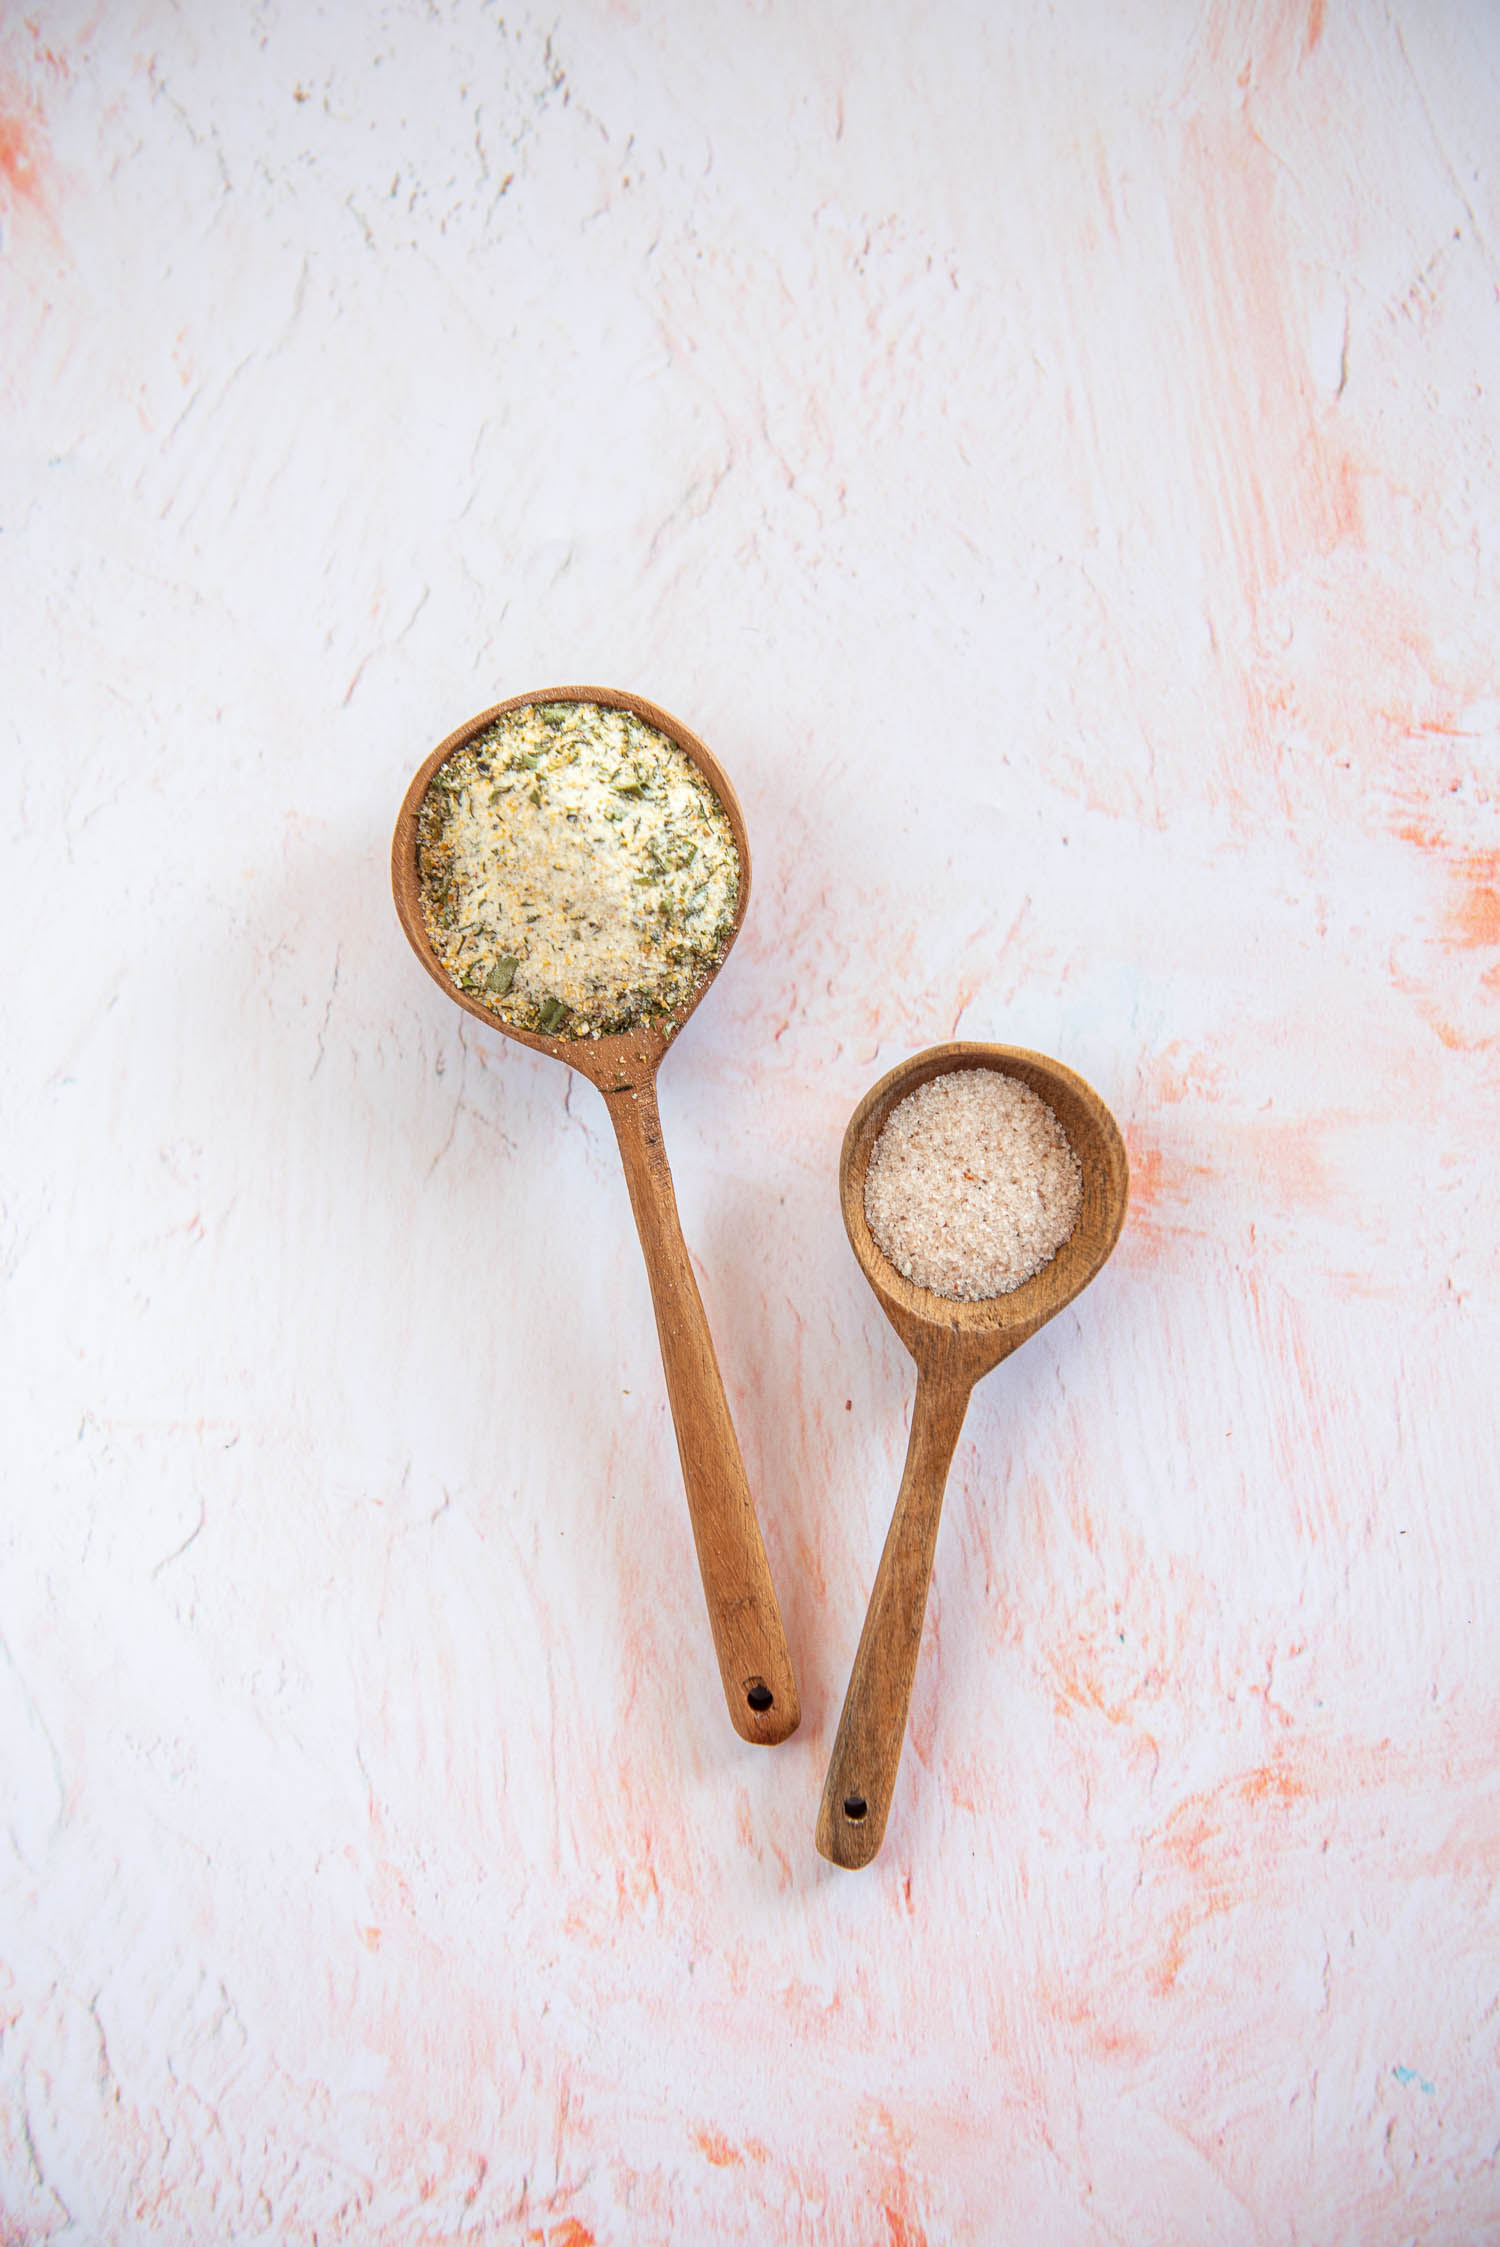 Two wooden spoons with spices inside on pink table